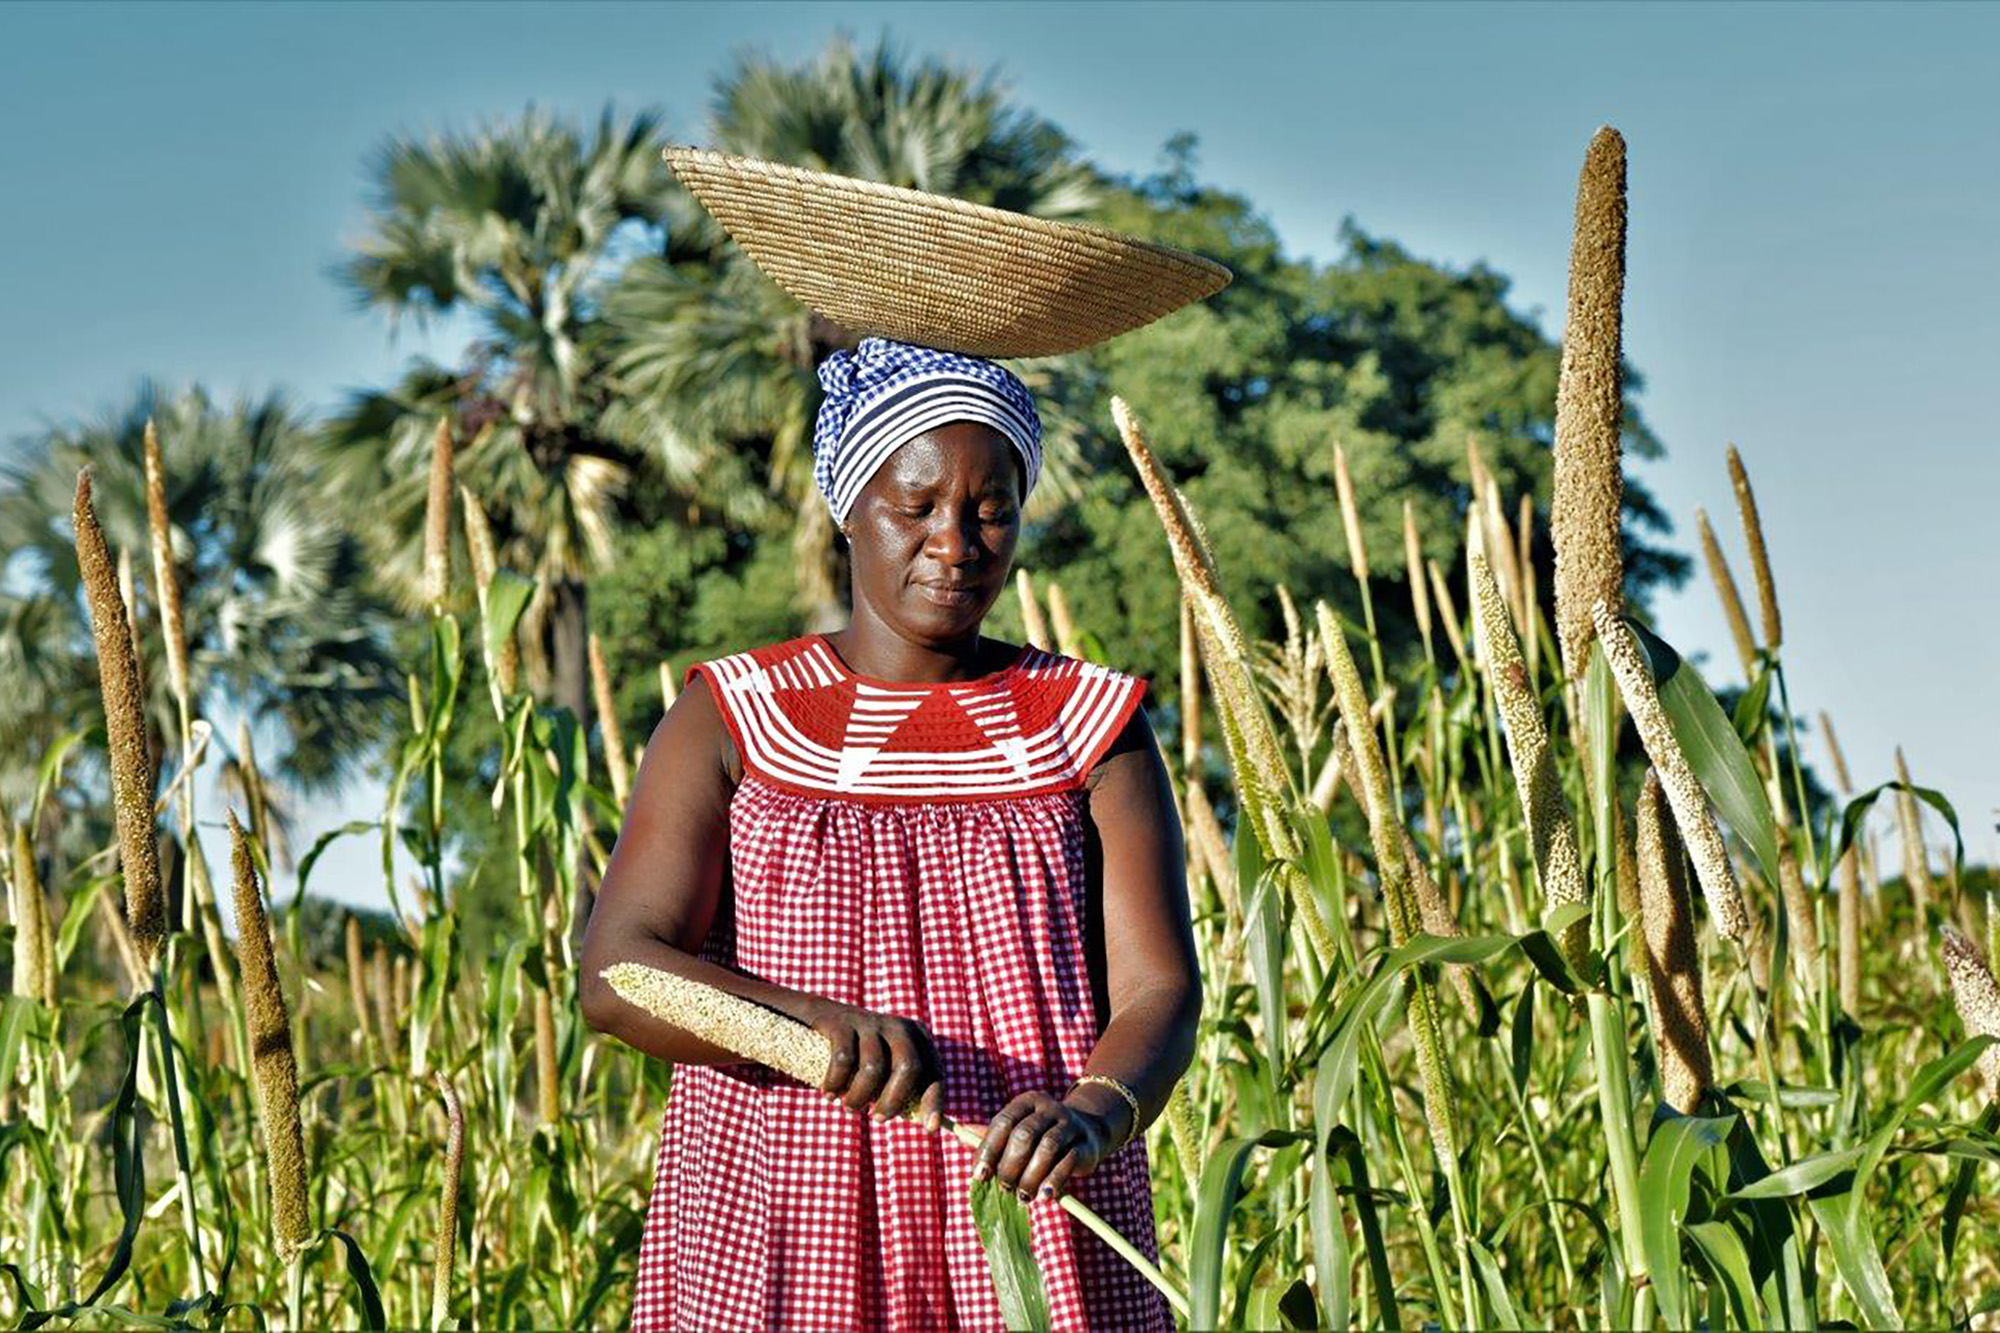  A woman harvesting Pearl Millet after a morning gathering Marula fruit to make traditional beer and oil.